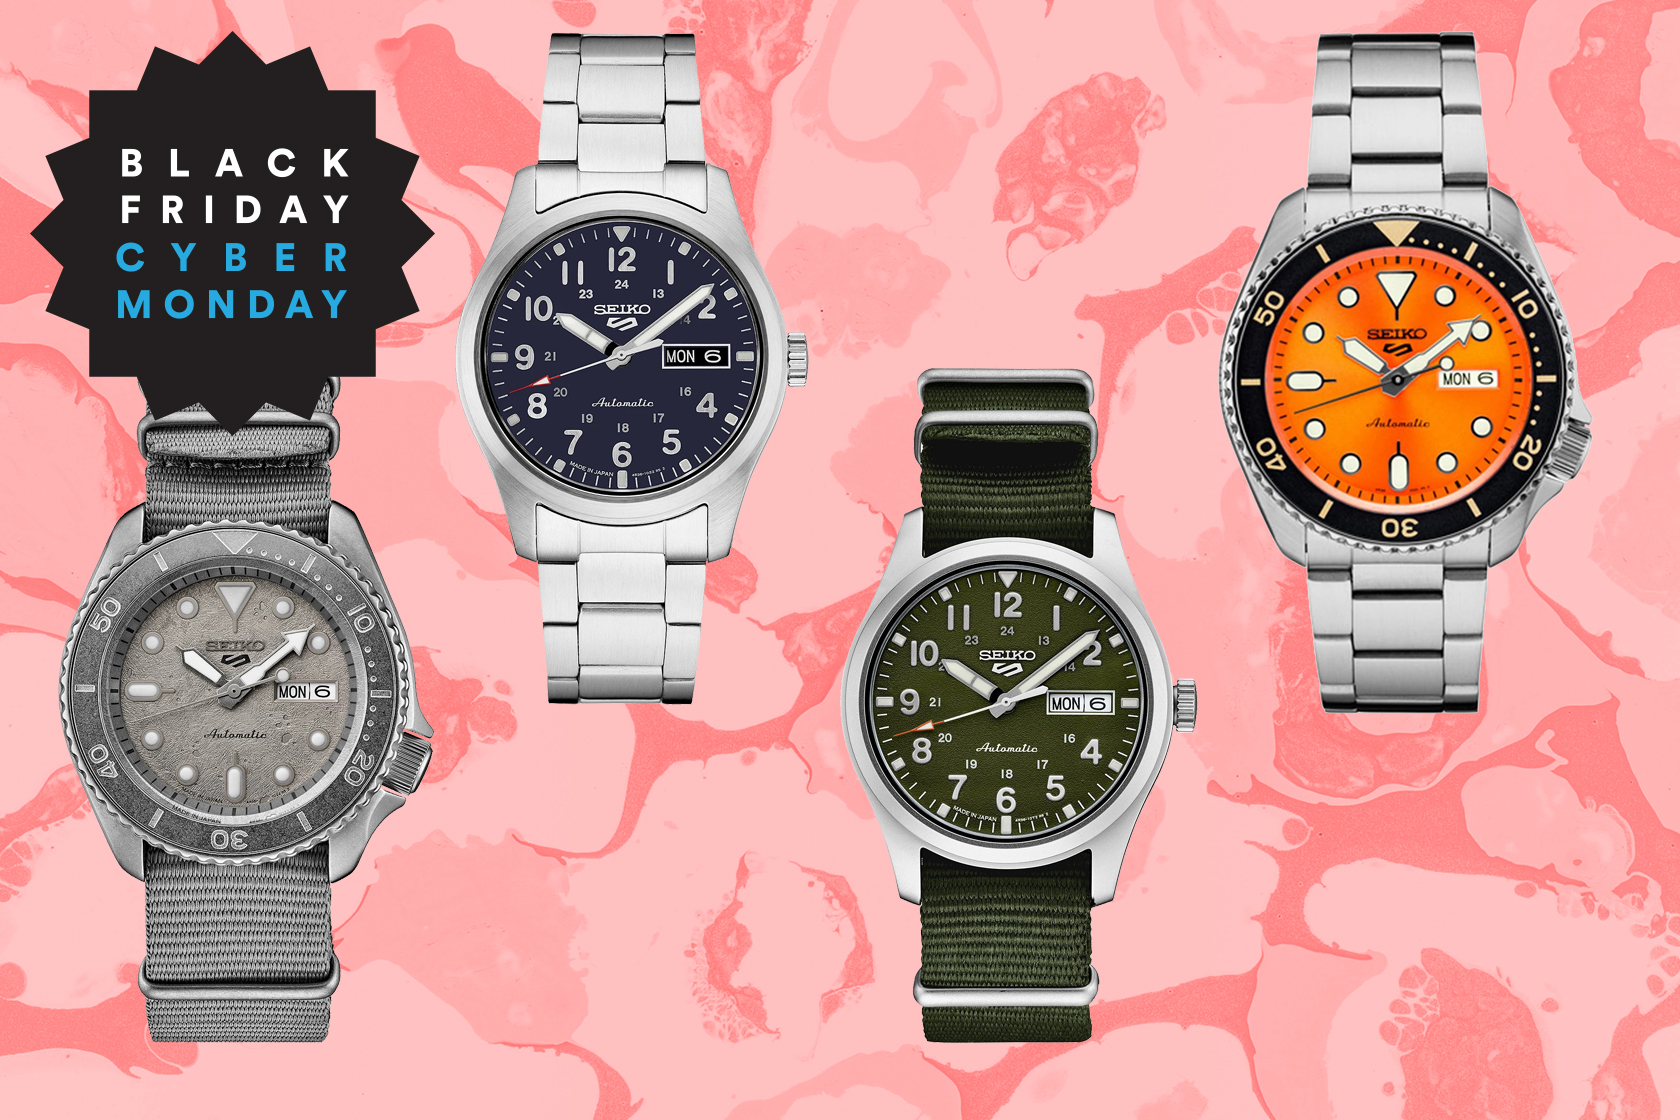 Seiko 5 watches are under $200 at Macy's on Black Friday